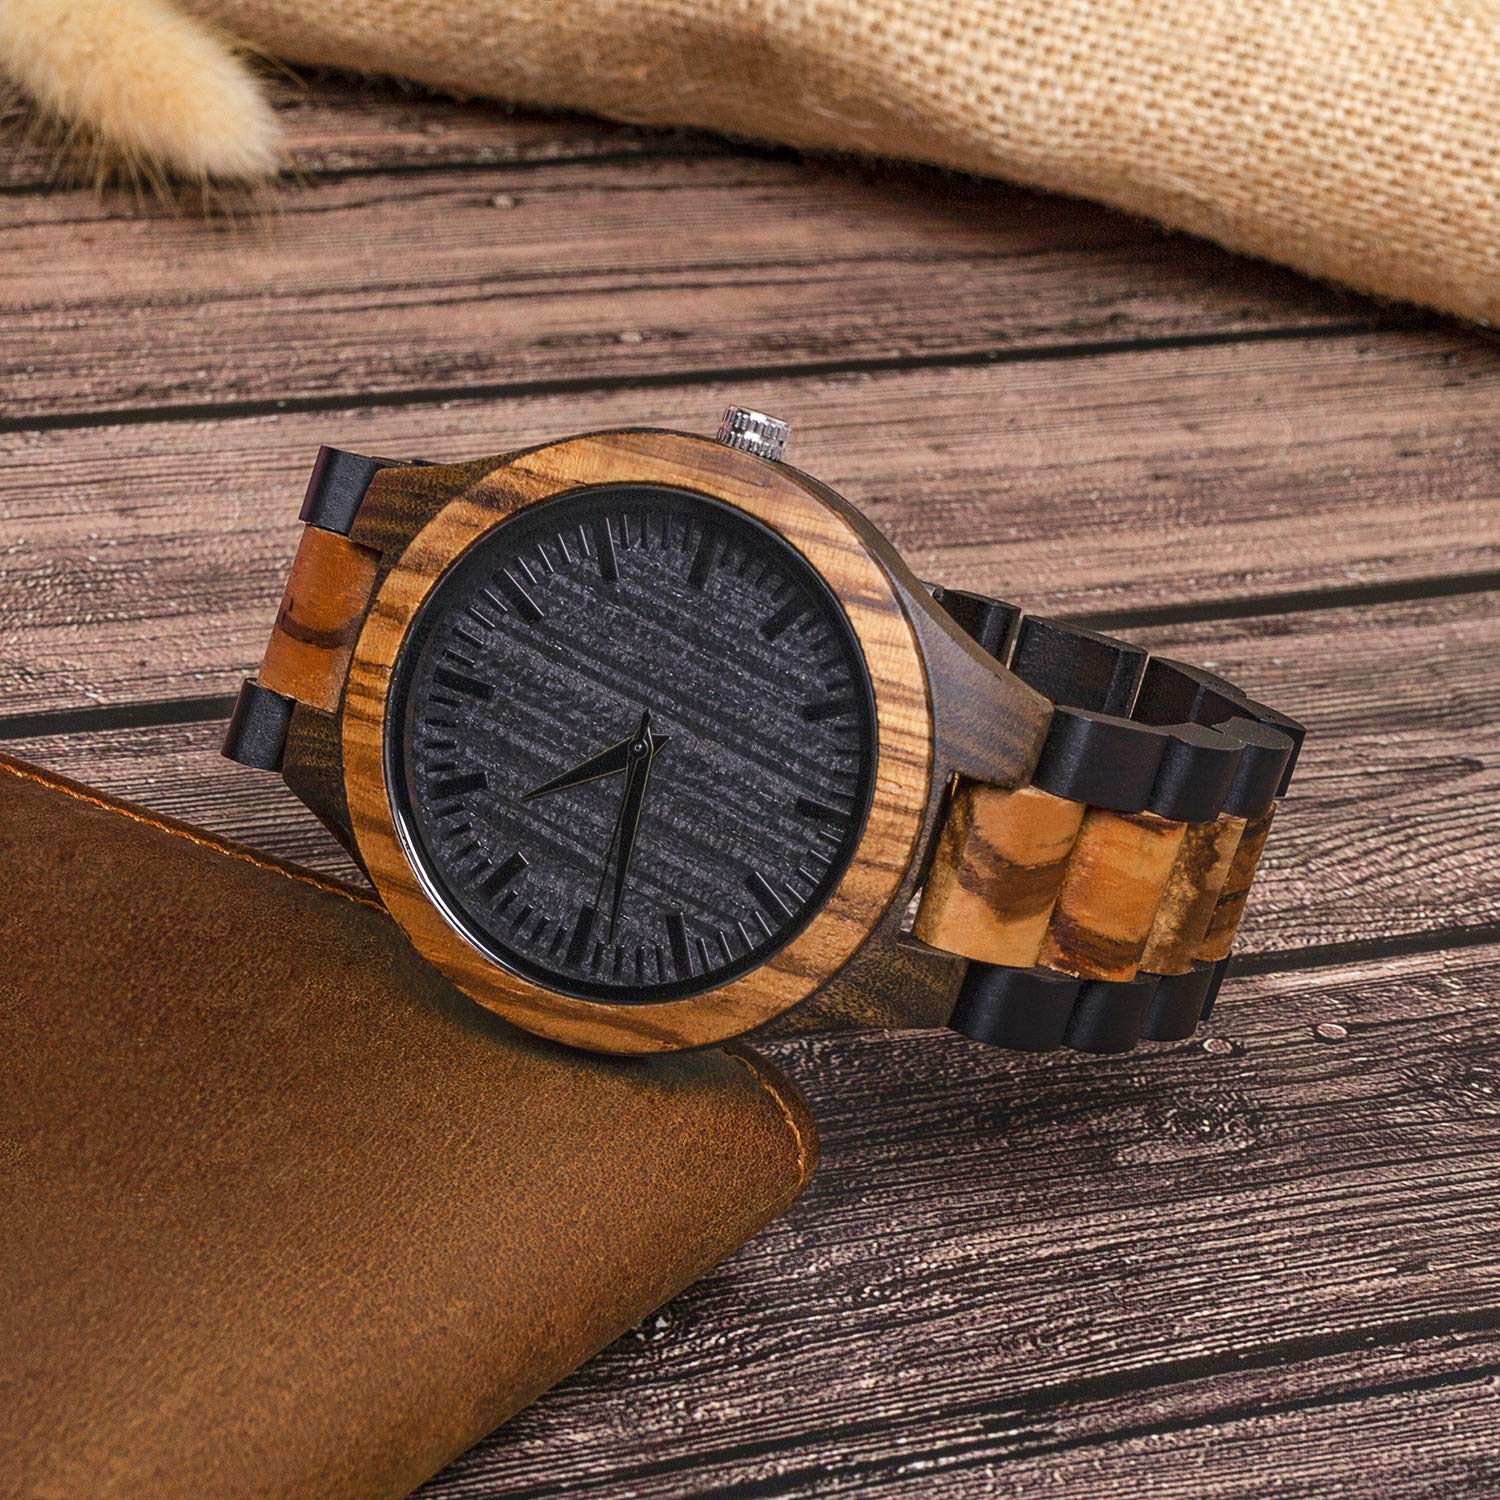 kullder Personalized Groomsmen Gifts for Wedding Engraved Watch for Best Man to Men Custom Wooden Watches for Men Personalized Groomsmen Gifts Ideas